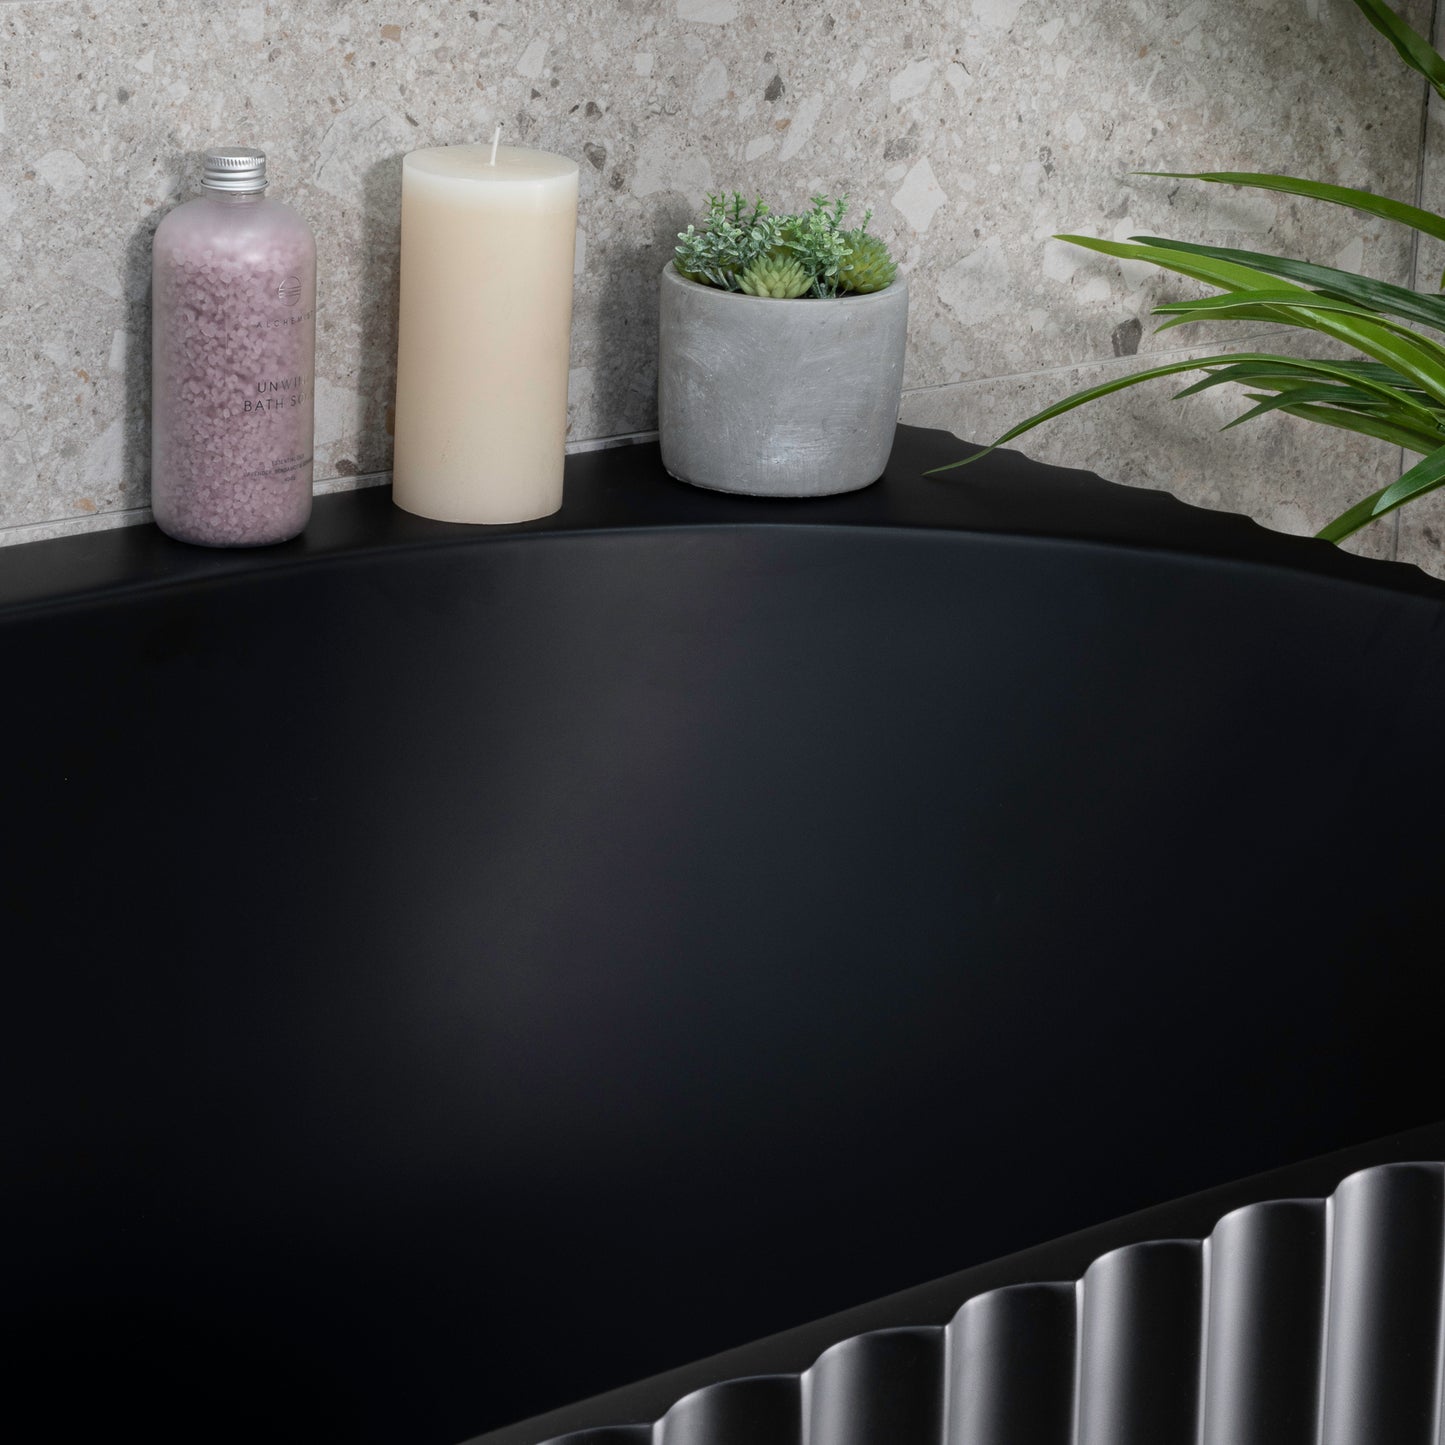 Agora Groove 1700mm Fluted Oval Freestanding Back to Wall Bath, Matte Black